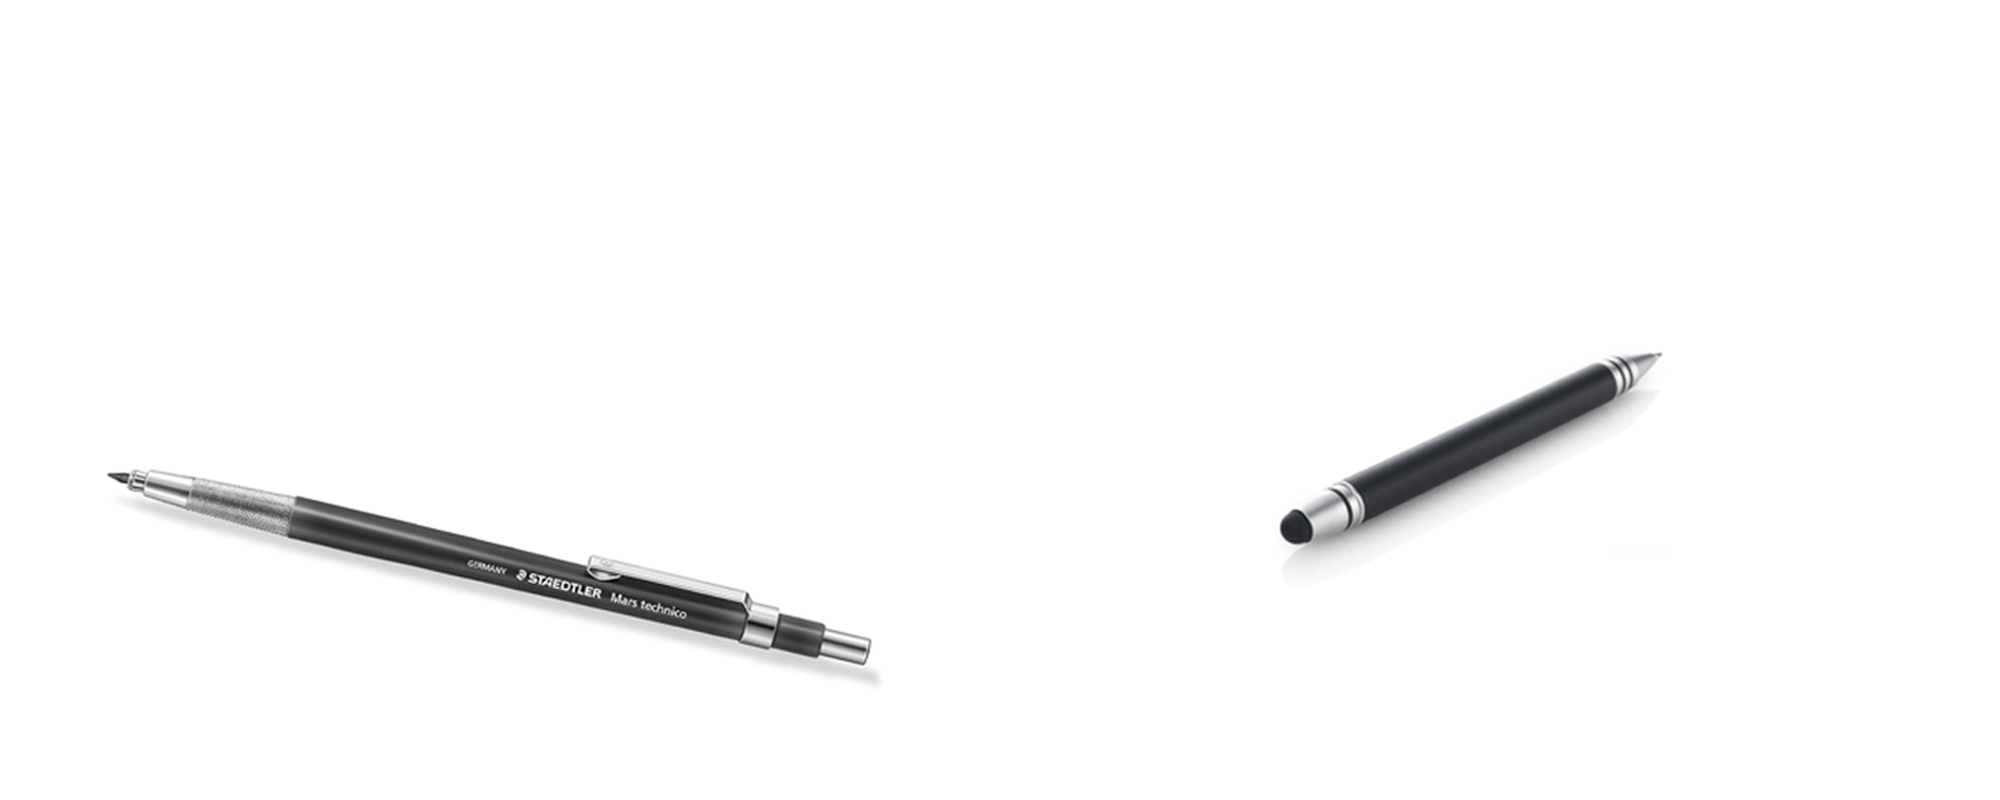 image of mechanical pencil and tablet stylus